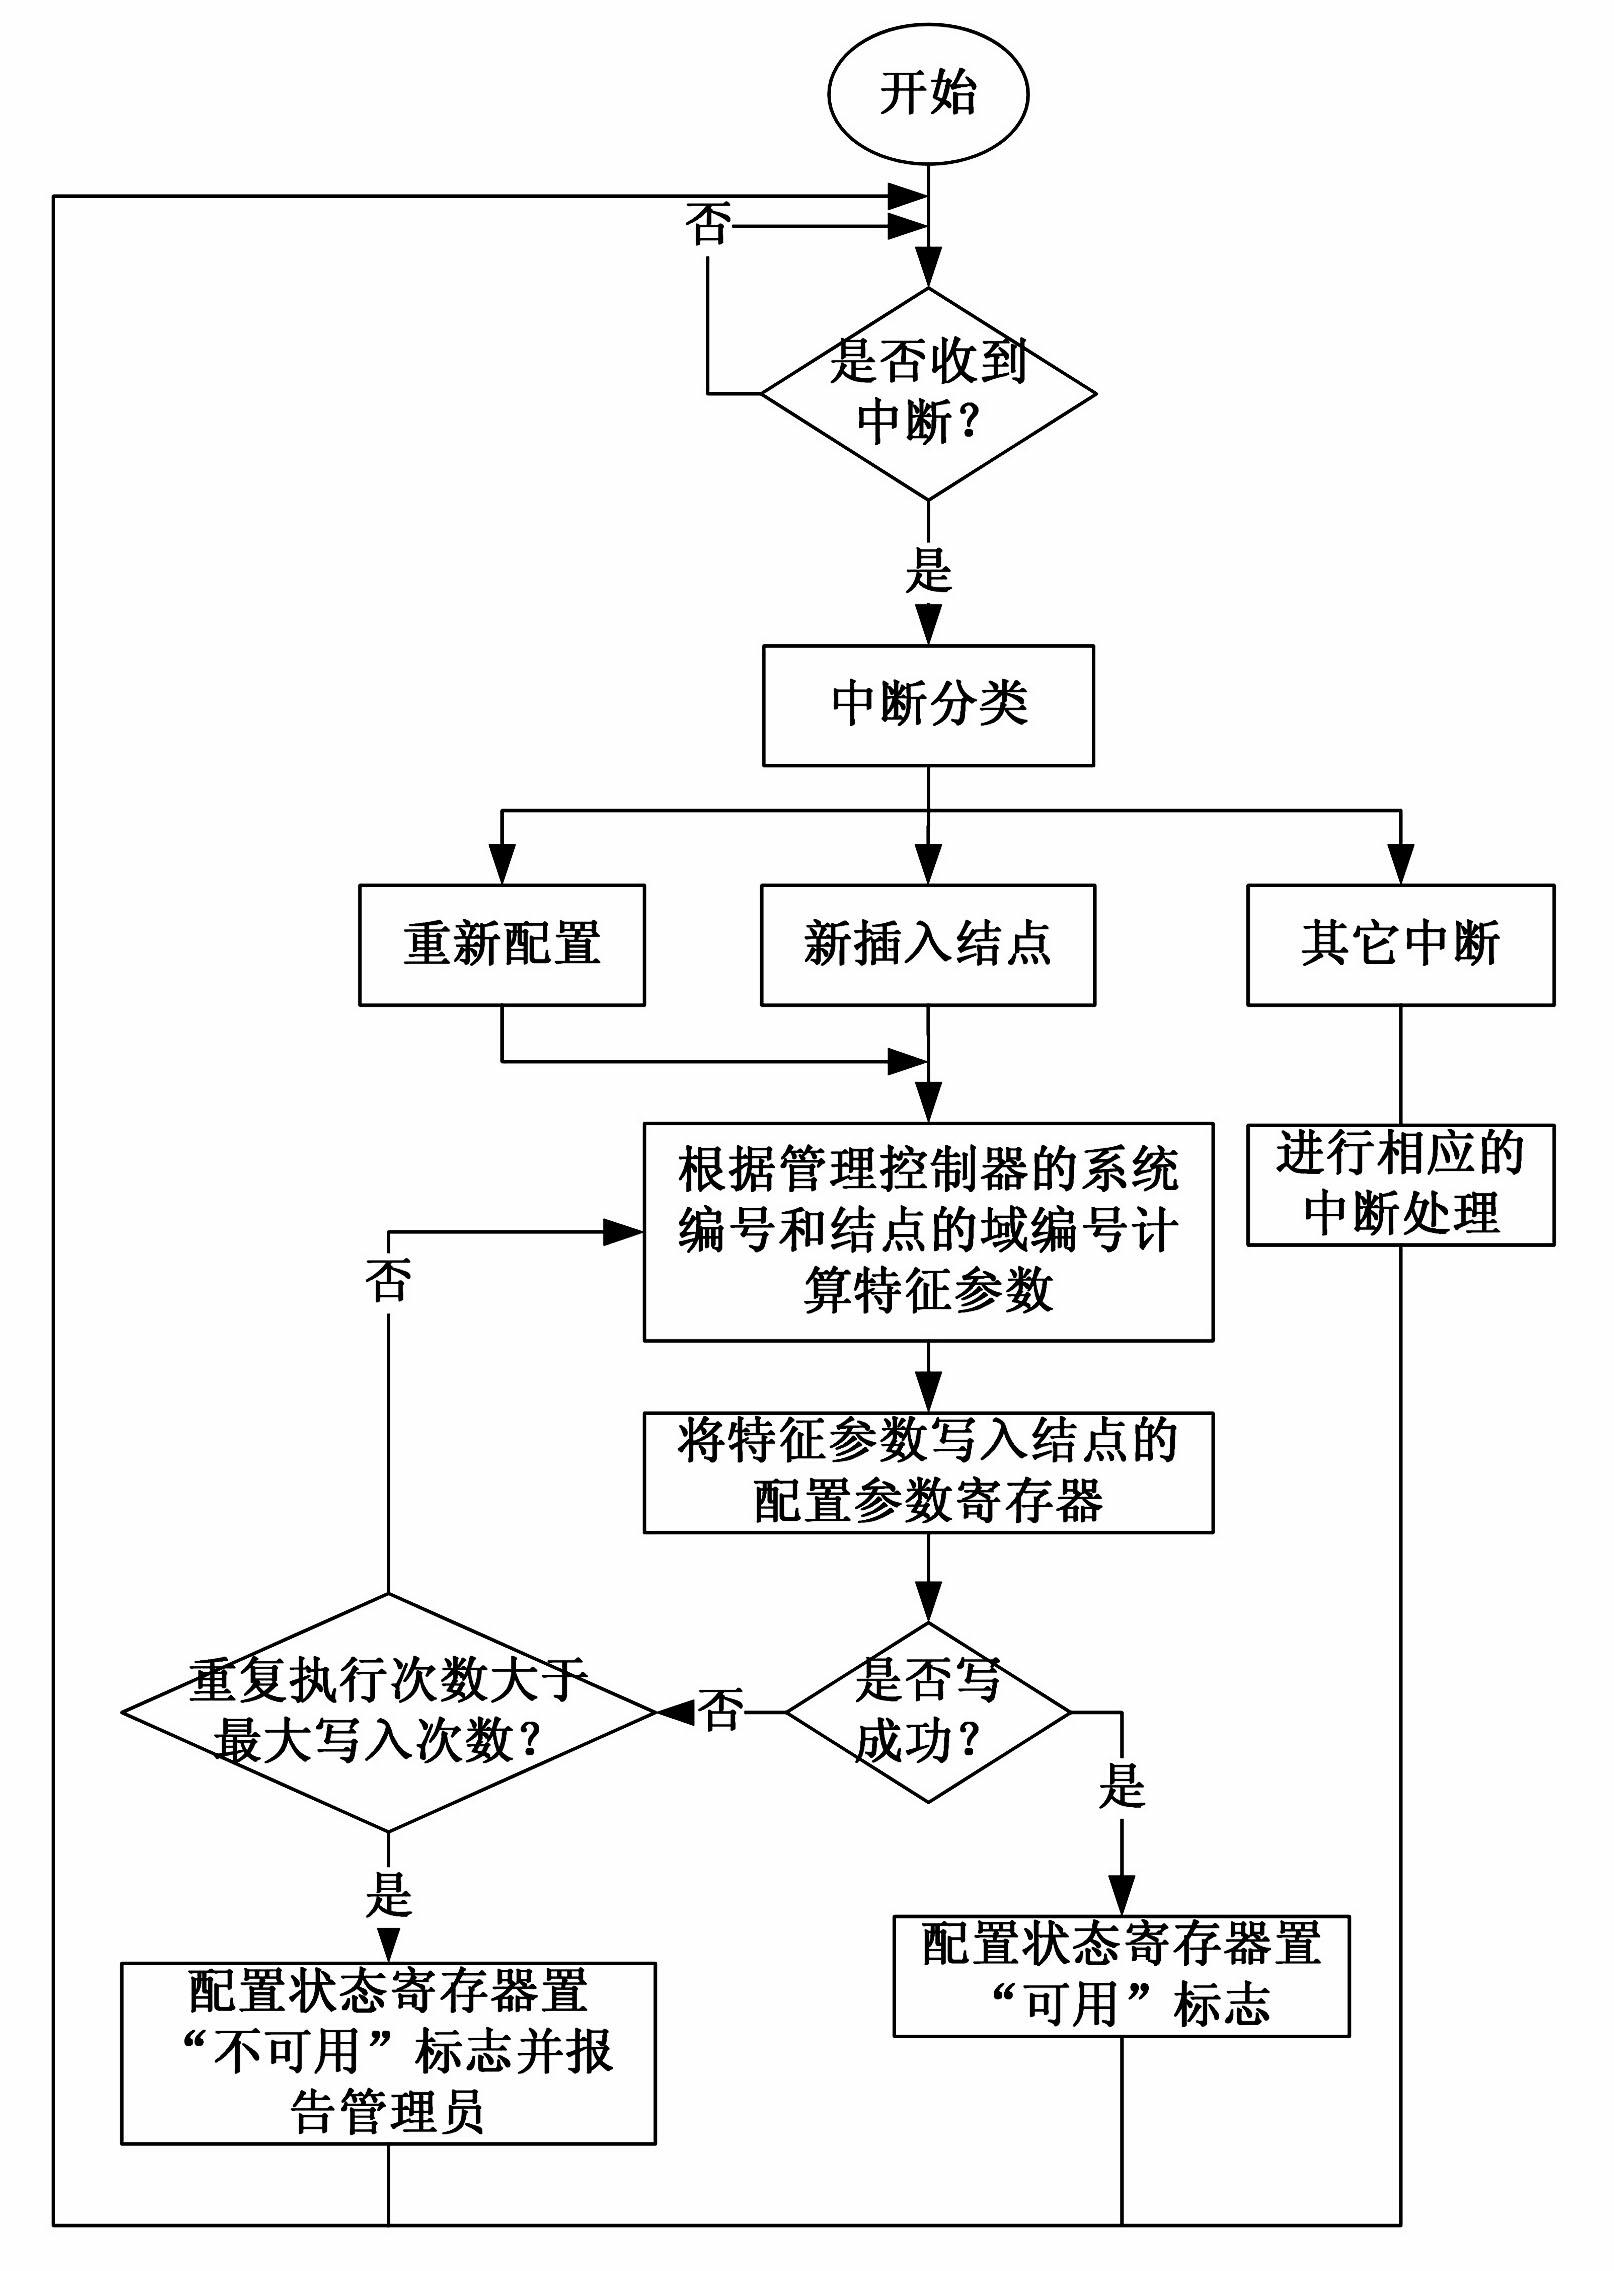 Method and device for quickly starting massively parallel computer system